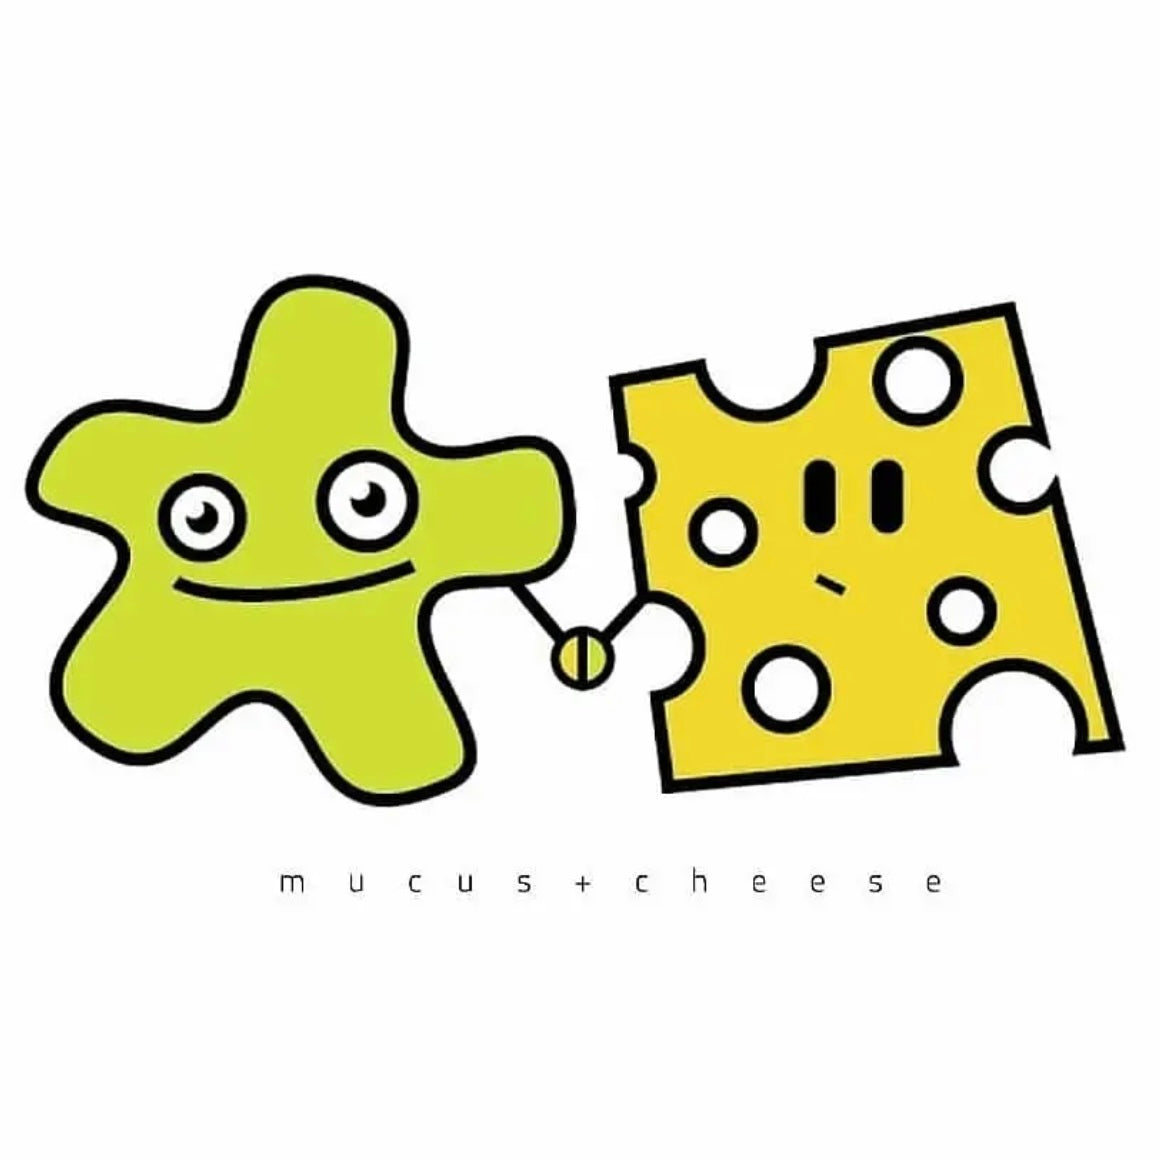 mucus and cheese symbiotic relationship logo